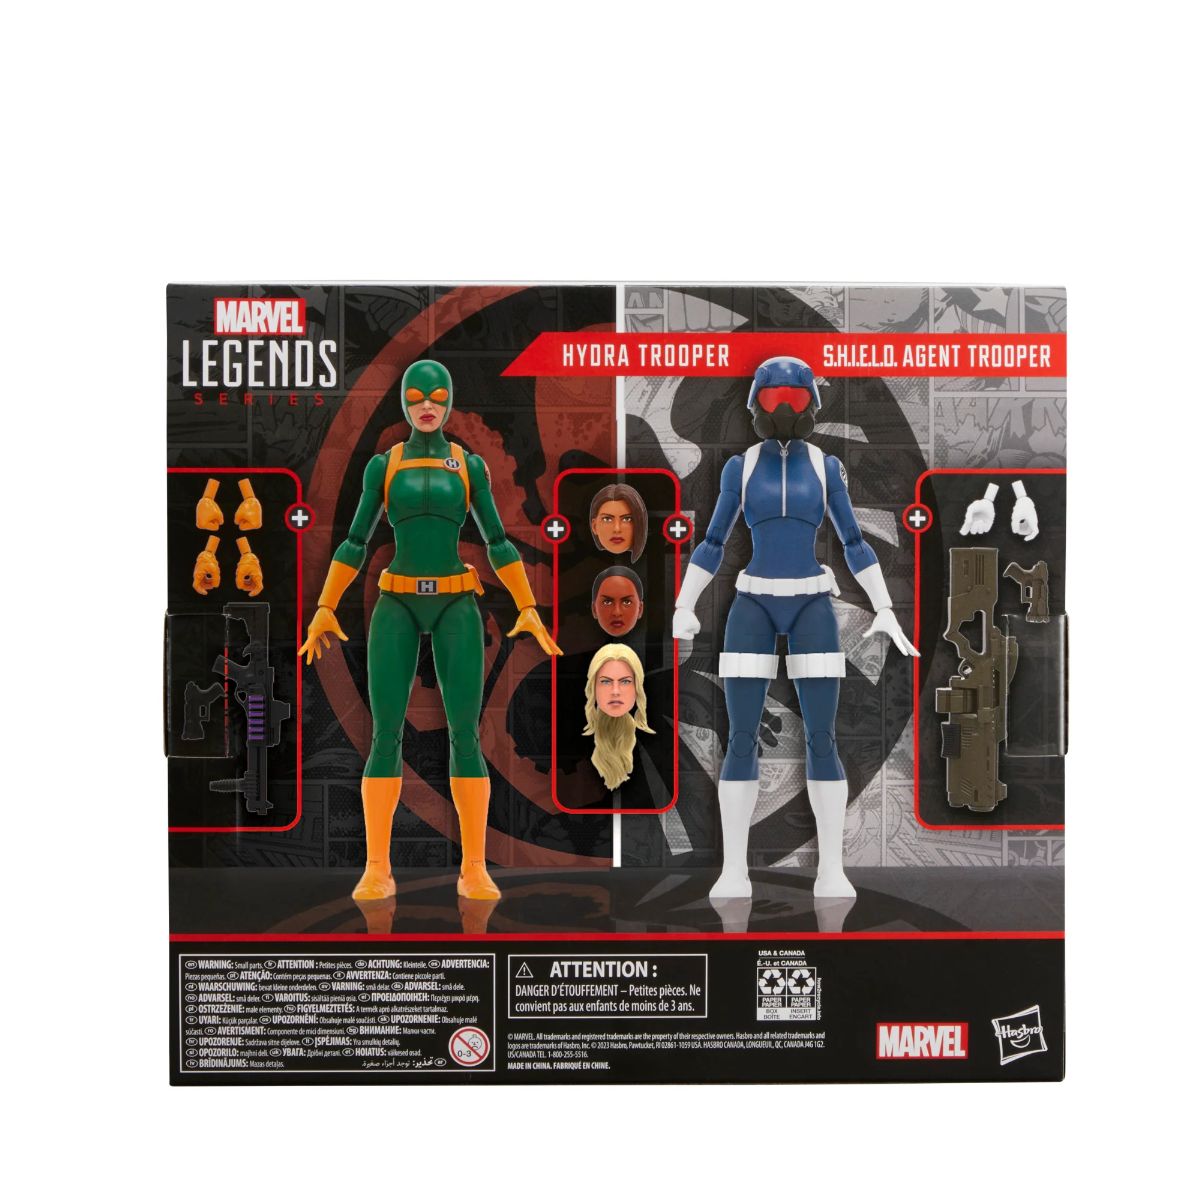 Marvel Legends S.H.I.E.L.D. Agent Trooper and Hydra Trooper 6-Inch Action Figure 2-Pack画像